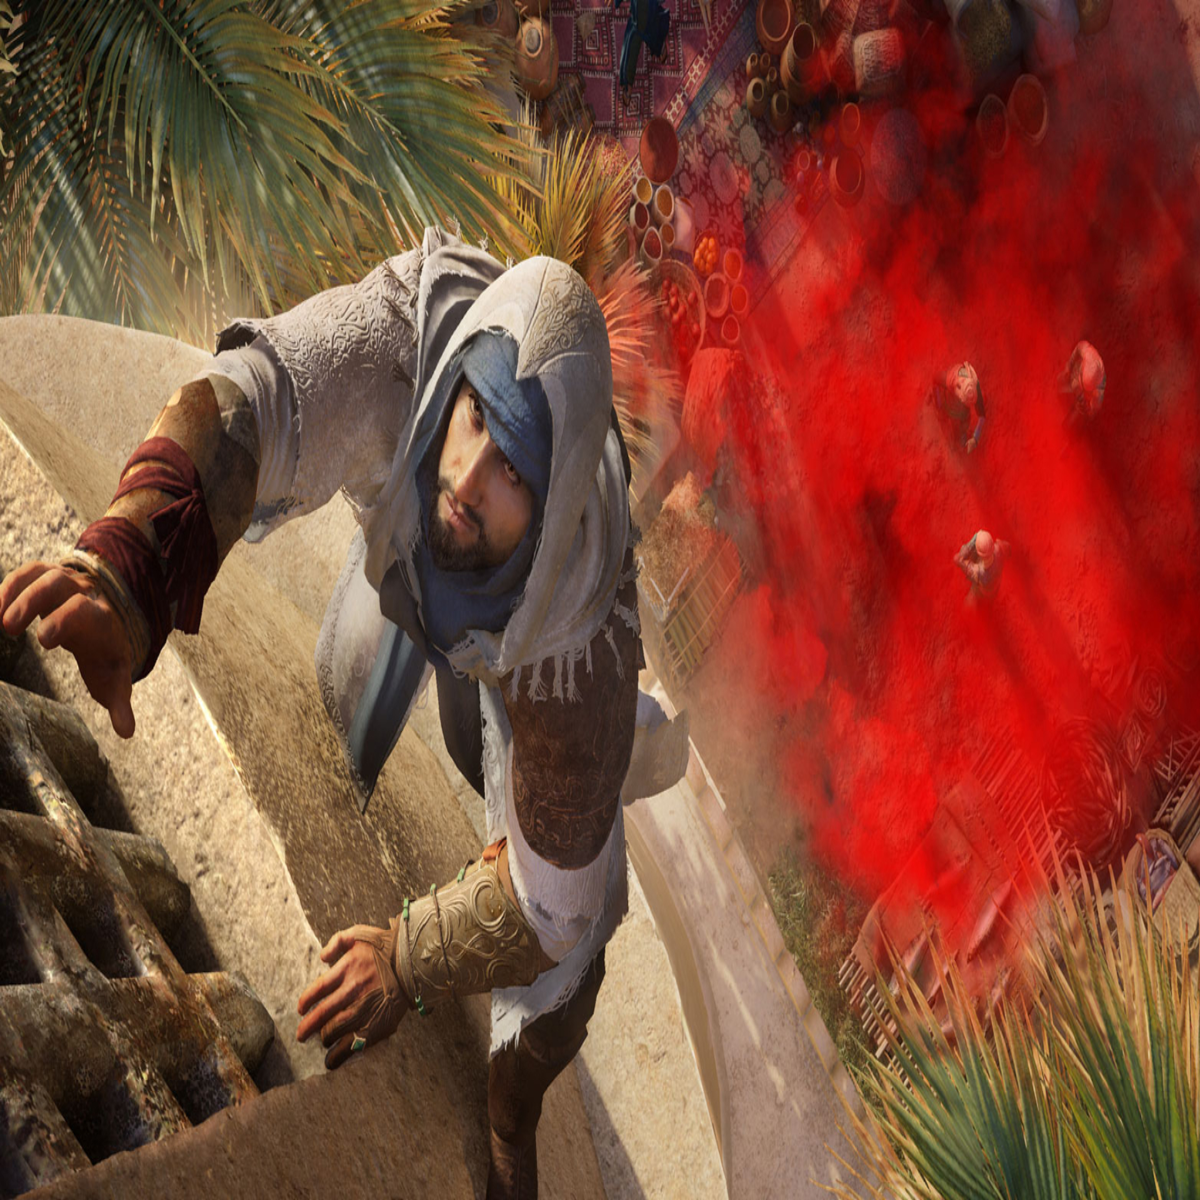 Assassin's Creed Mirage arrives 2023, drops RPG elements, wants to